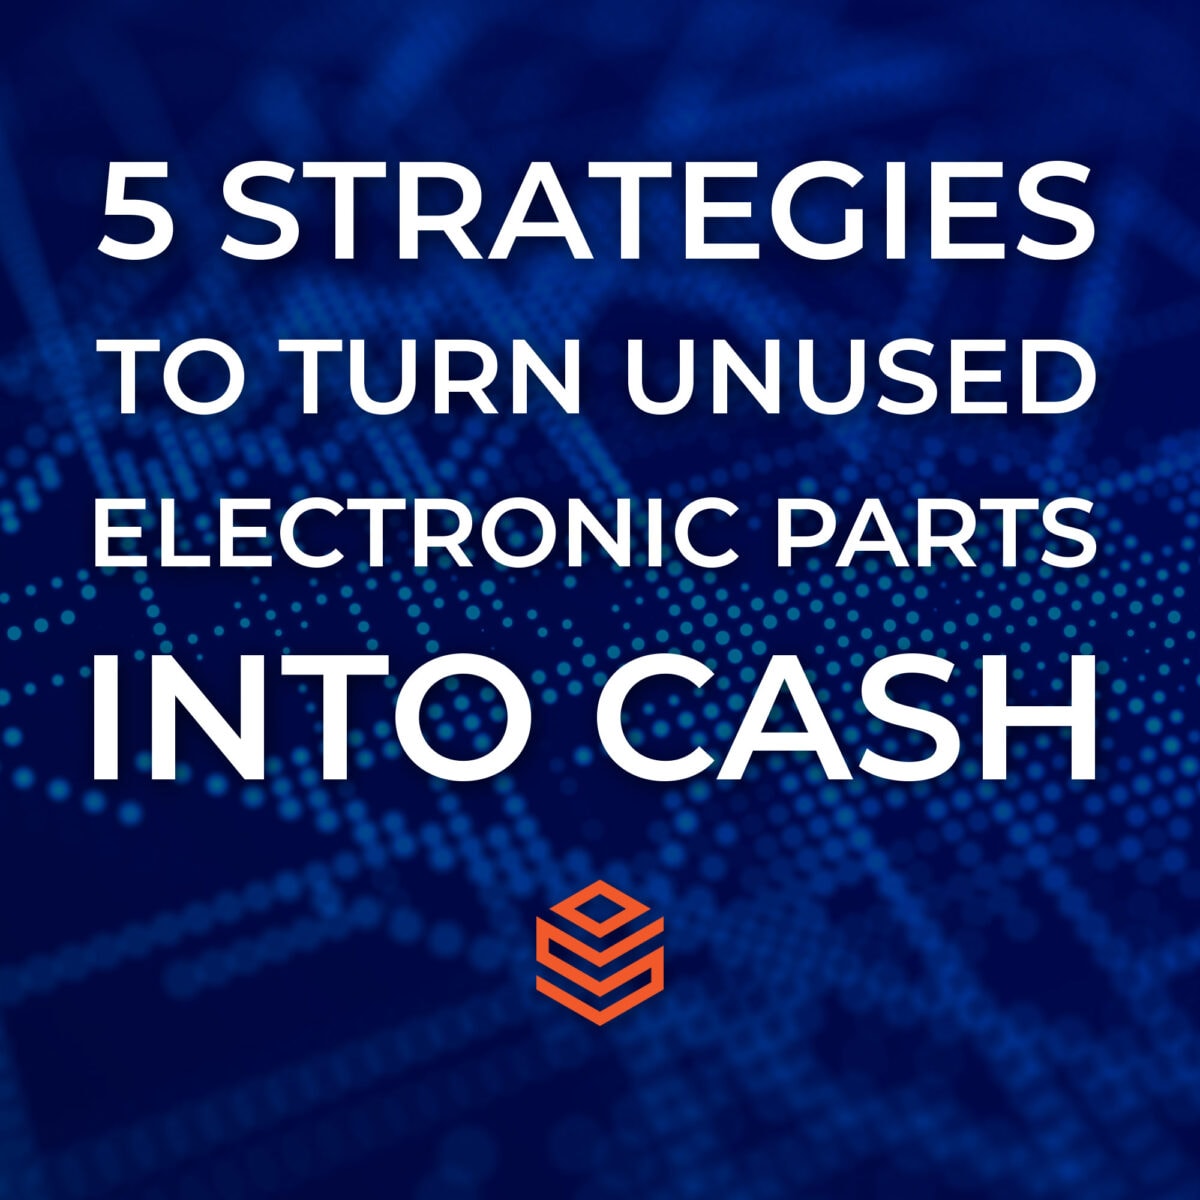 5 Strategies to Turn Unused Electronic Parts into Cash